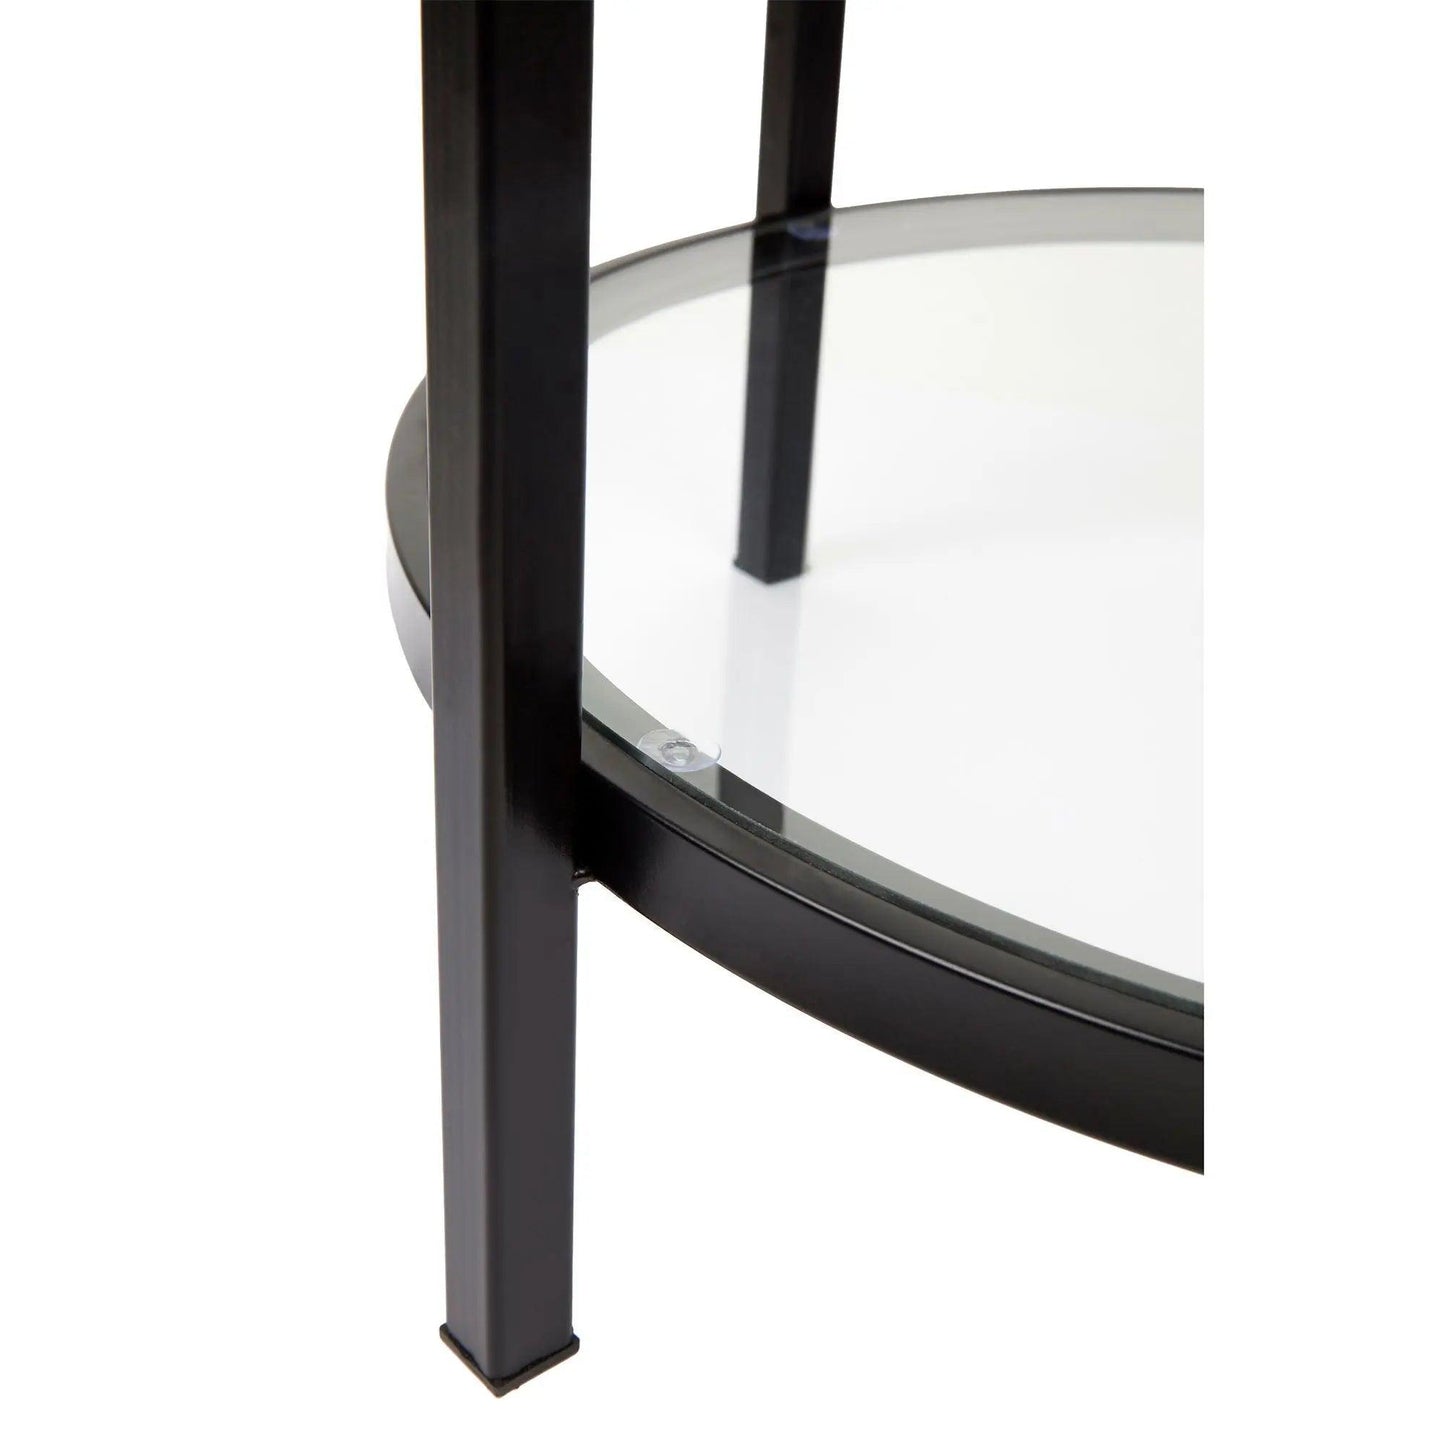 Cafe Lighting & Living Cocktail Glass Round Side Table - Black - Side Table324139320294117460 3